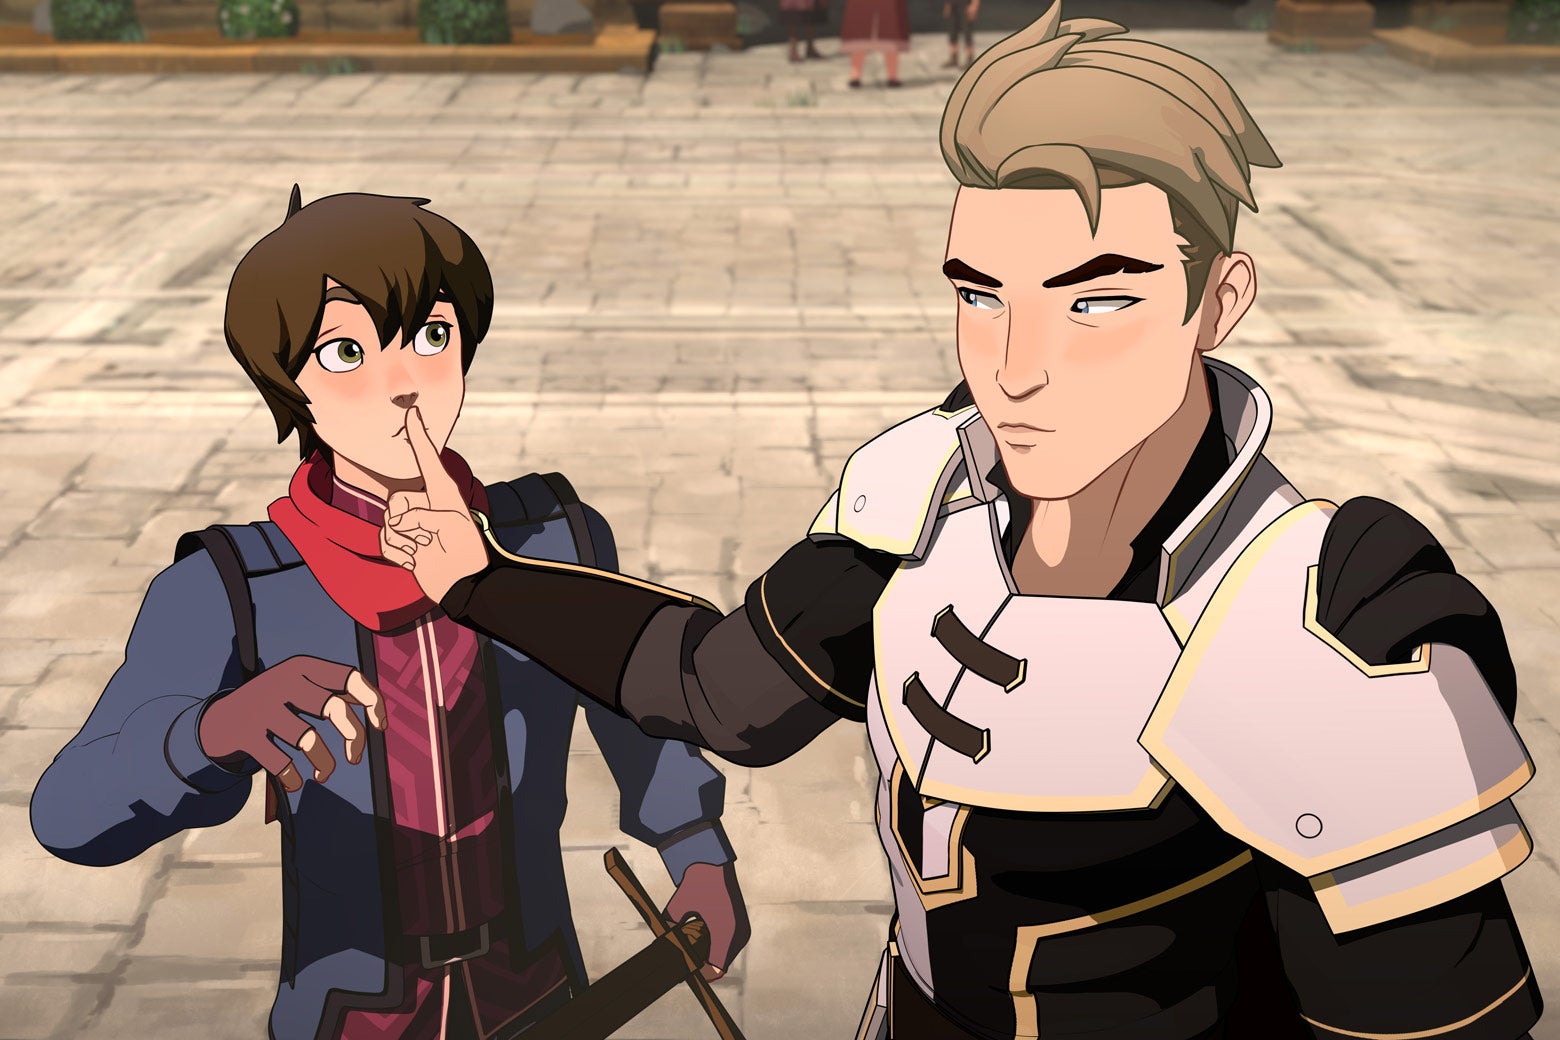 In a frame from the animated show The Dragon Prince, Soren holds a finger to Callum's lips to shush him. Callum's face is shocked, probably, and Soren looks serious.